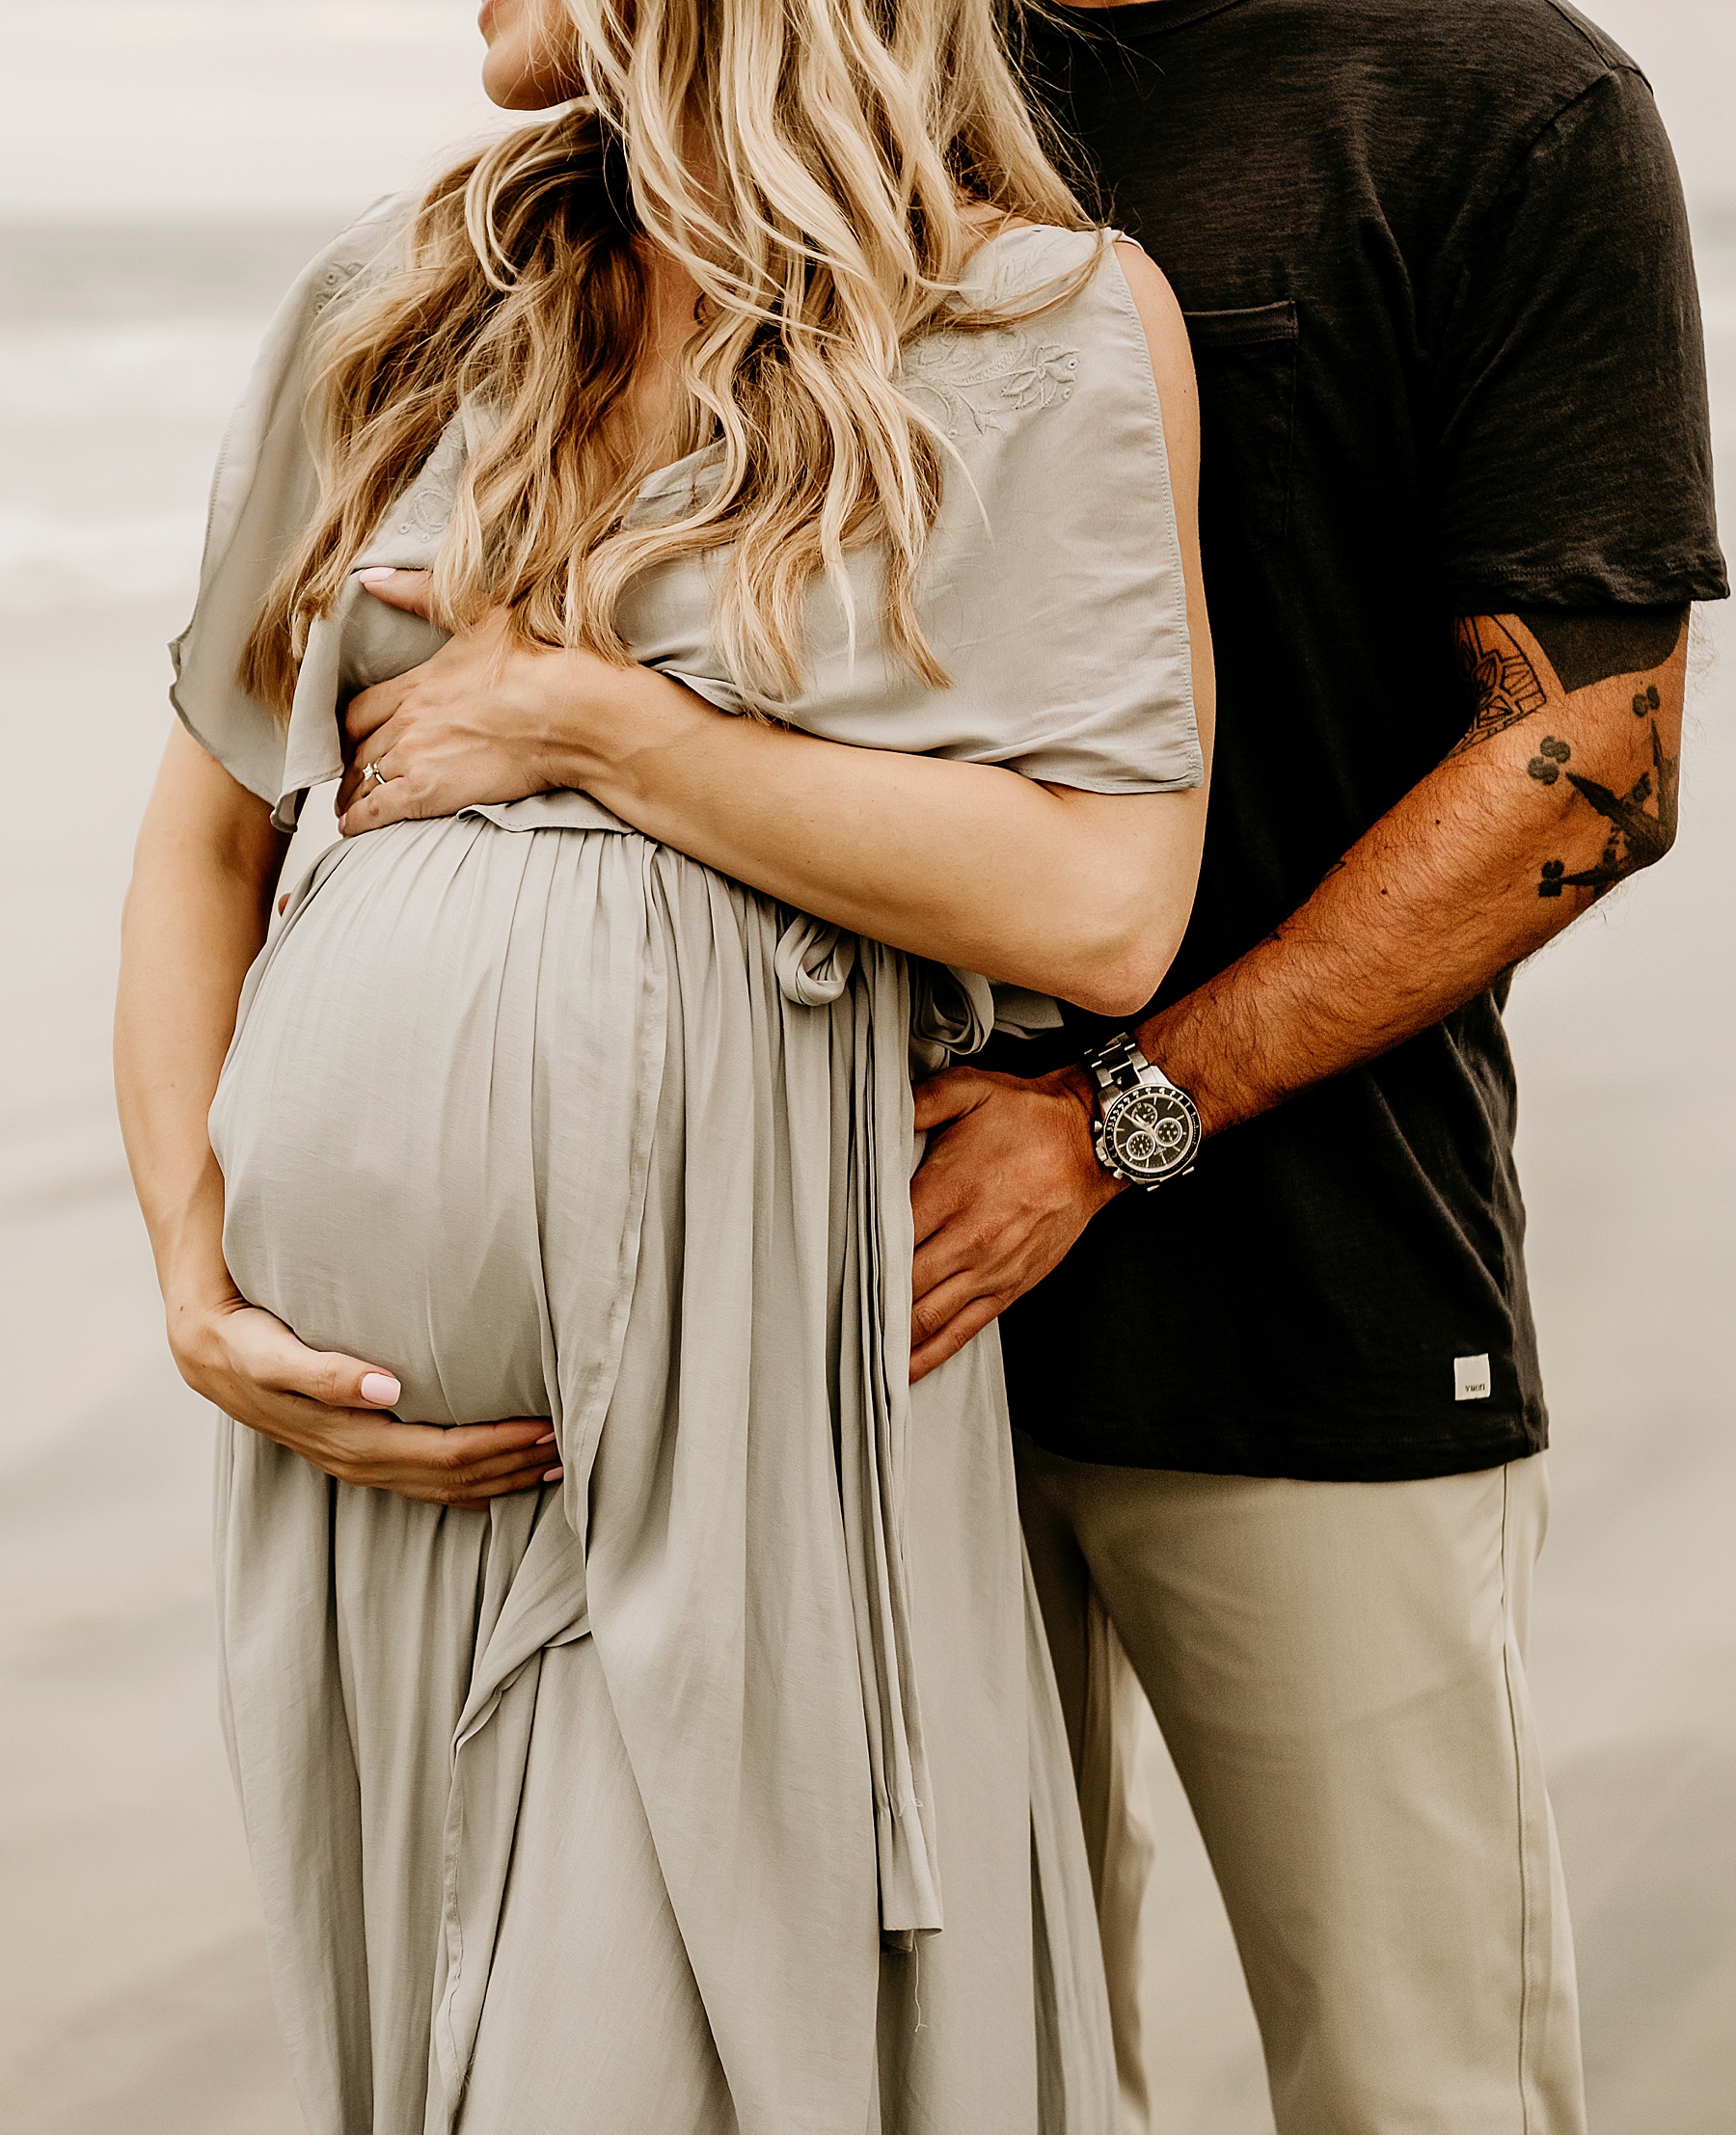 beach maternity pictures carlsbad